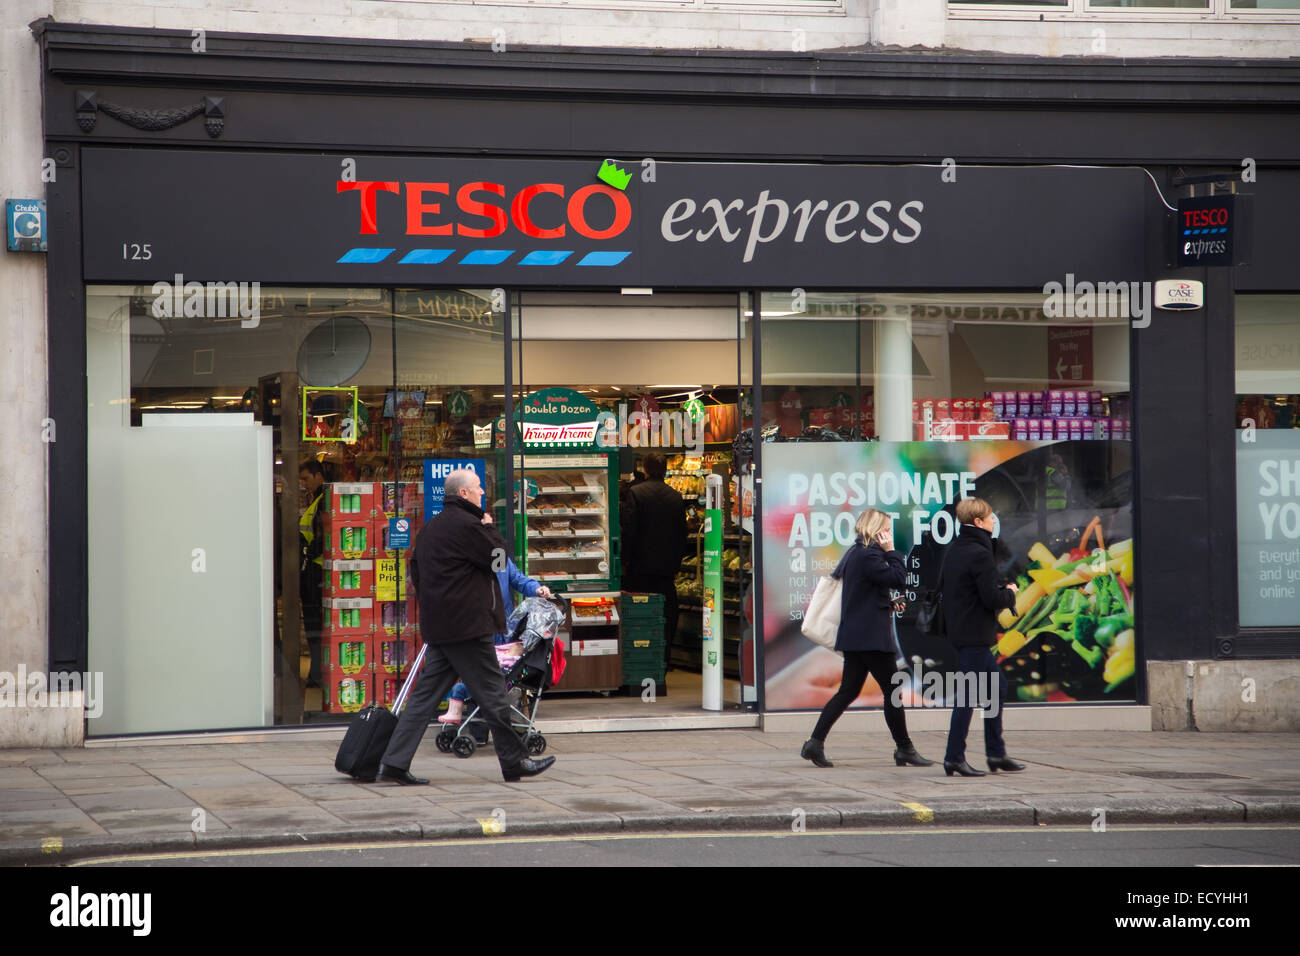 LONDON - DECEMBER 11TH: The exterior of an Tesco's express supermarket on December the 11th, 2014, in London, England, UK. Tesco Stock Photo